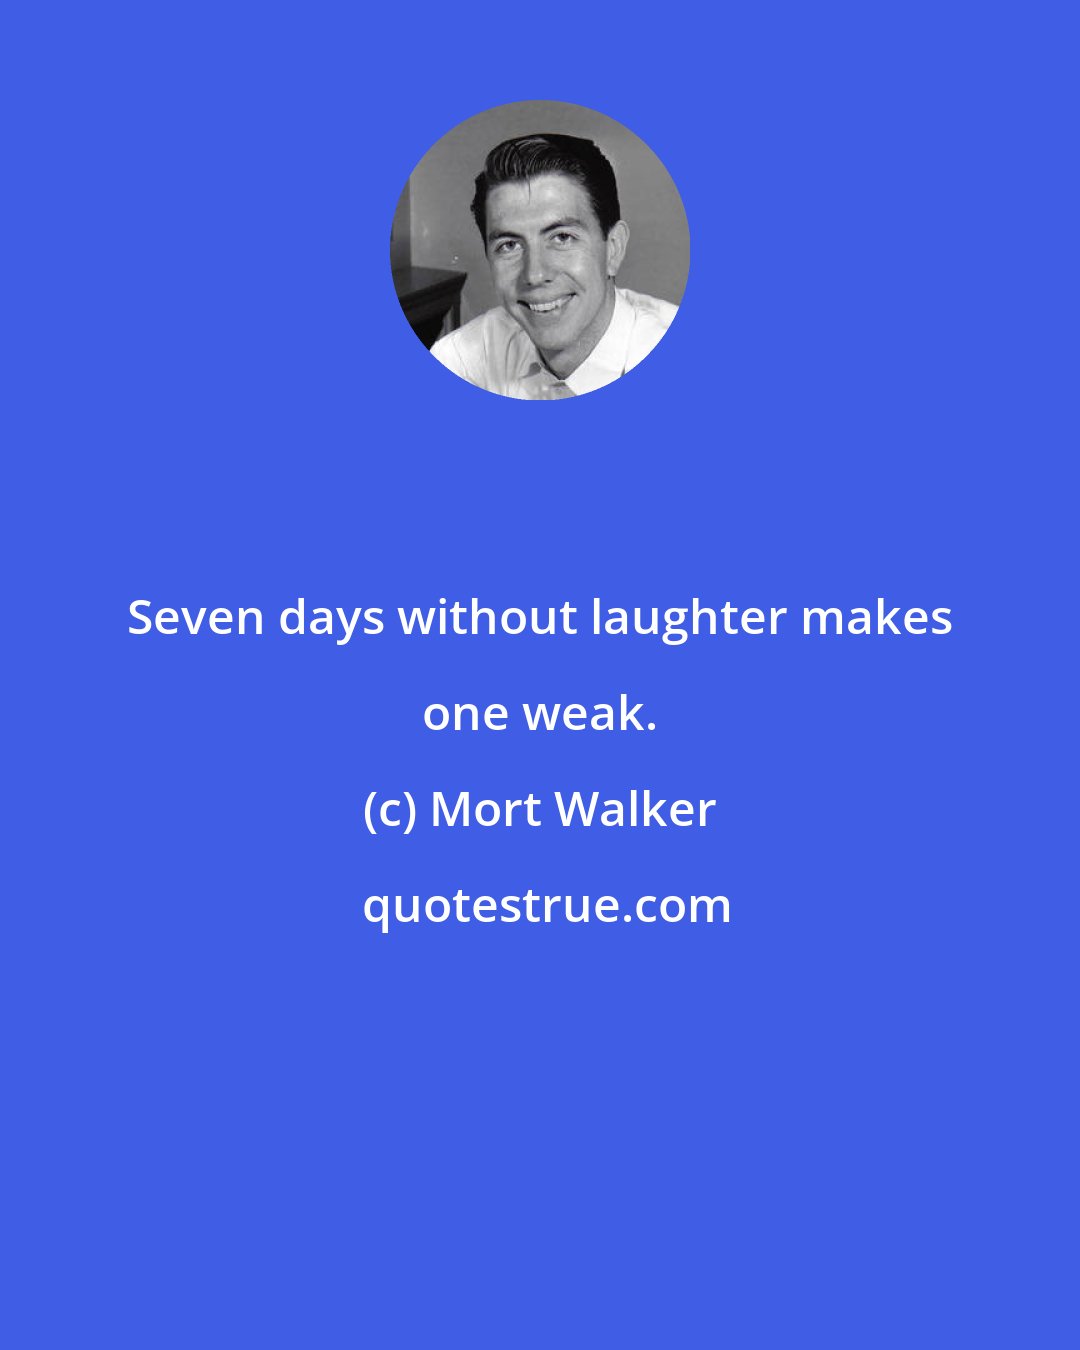 Mort Walker: Seven days without laughter makes one weak.